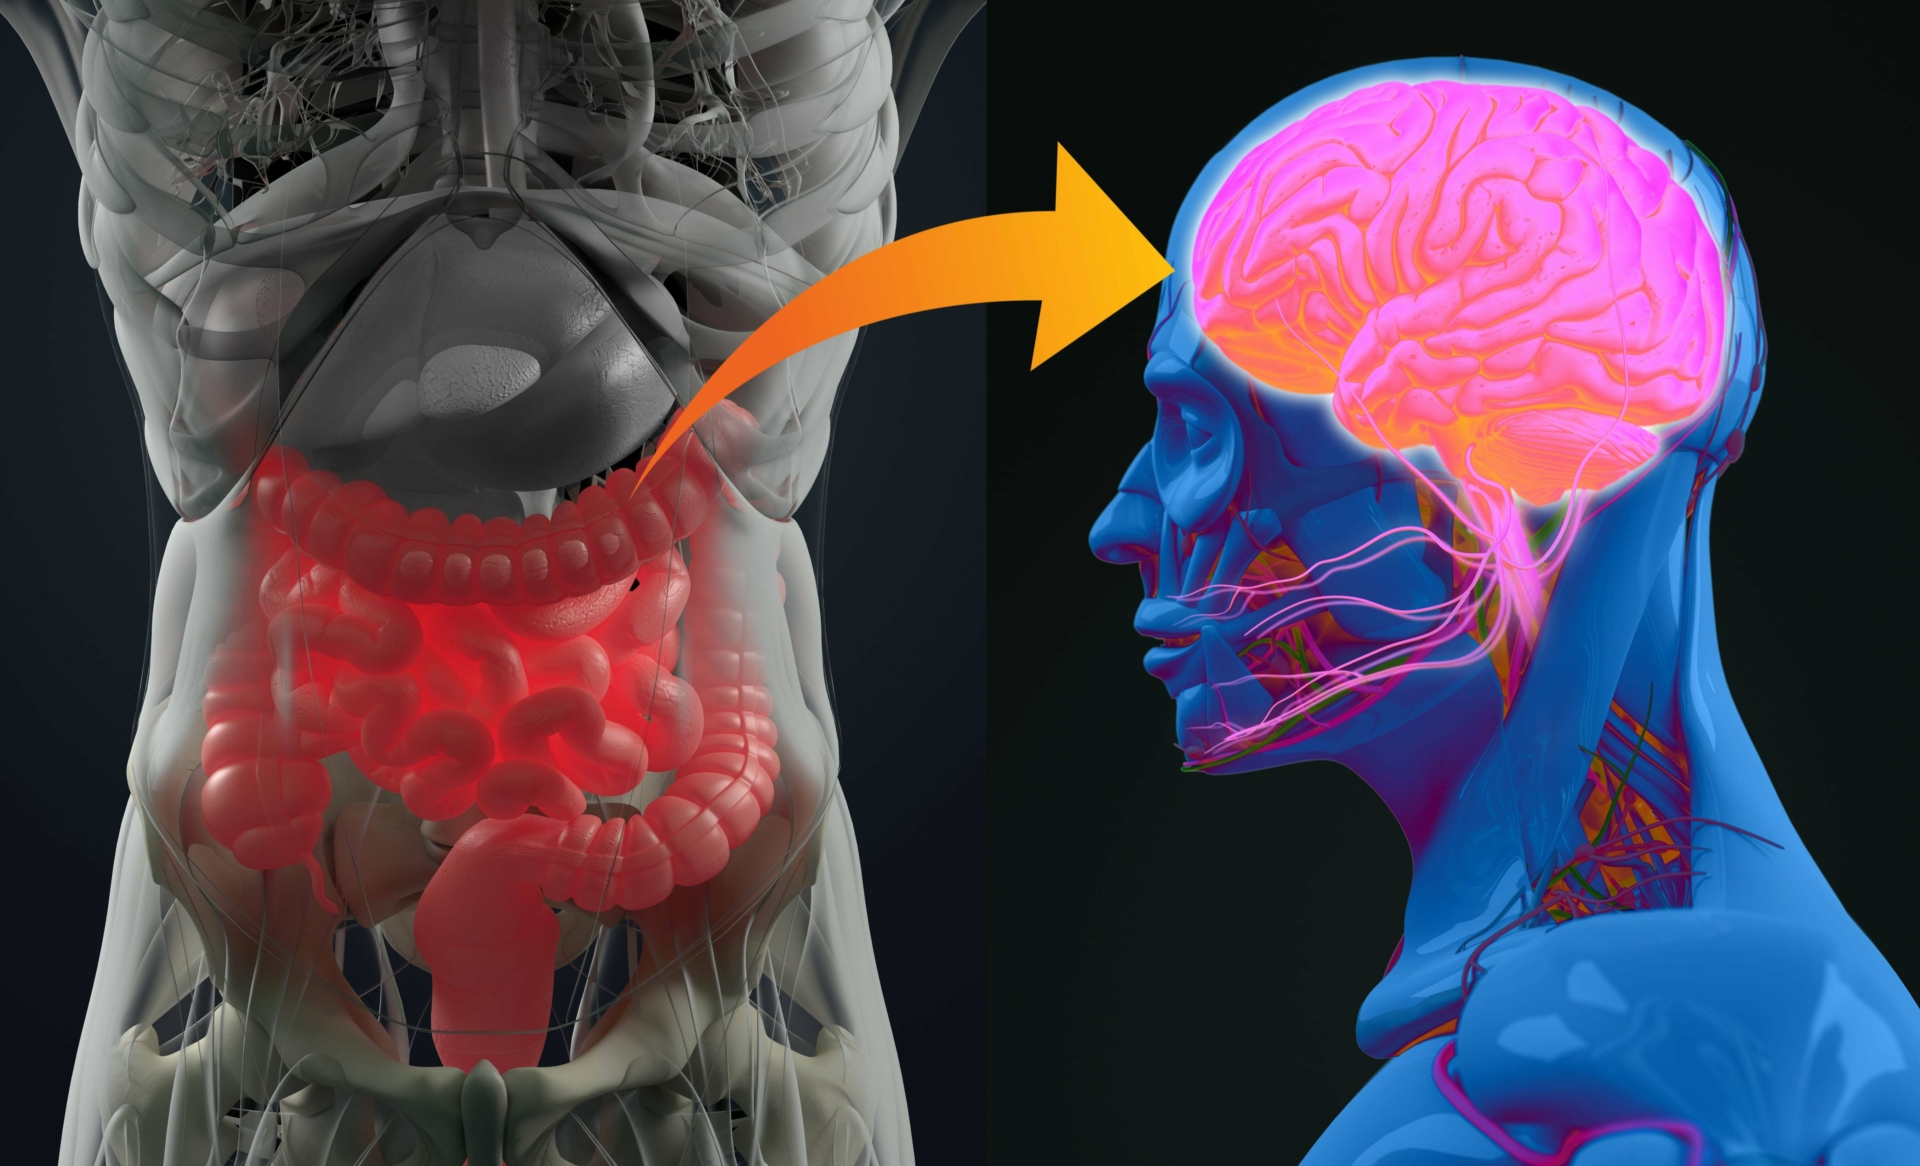 Investigating how our gut microbiome could be causing dementia